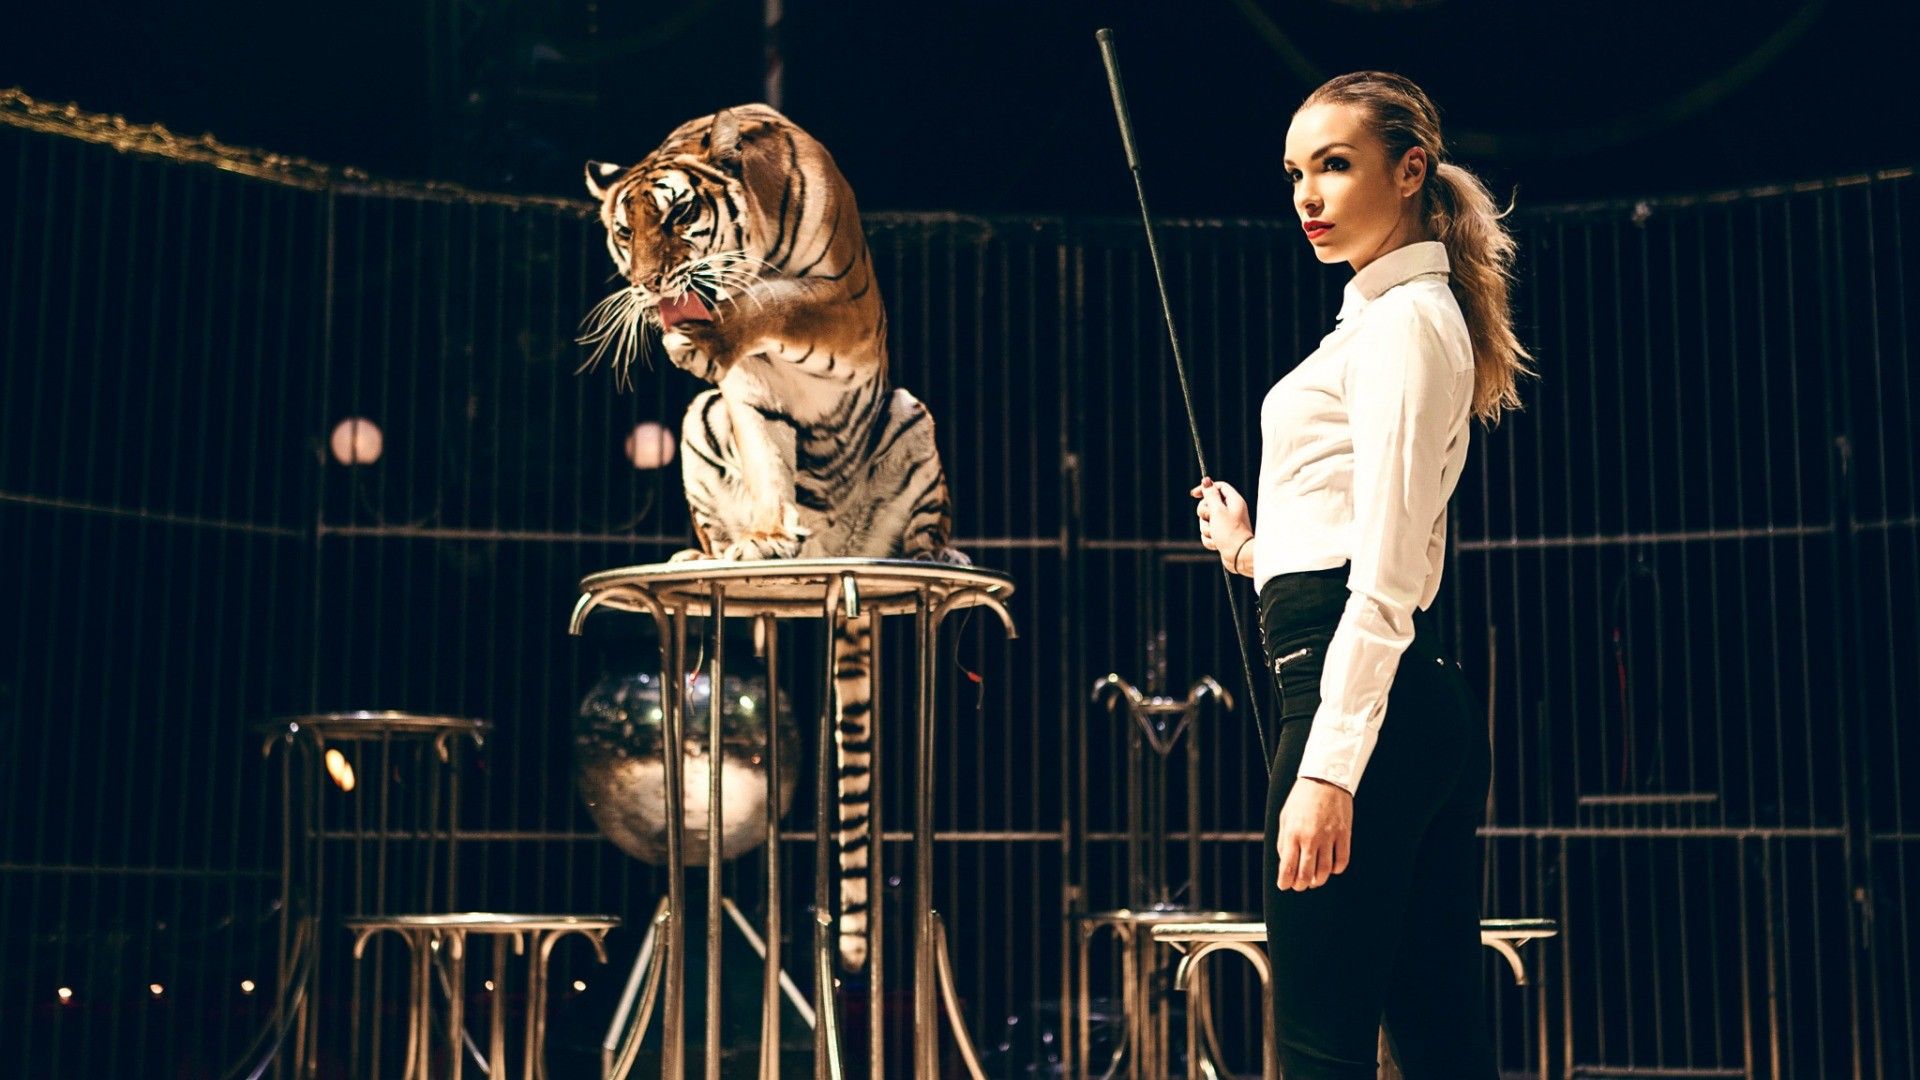 #tiger, #blonde, #whips, #red lipstick, #looking away, #ponytail, #tight clothing, #shirt, #wild cat, #long hair, #animals, #training, #women, #model, #circus, #cages, wallpaper. Mocah.org HD Wallpaper